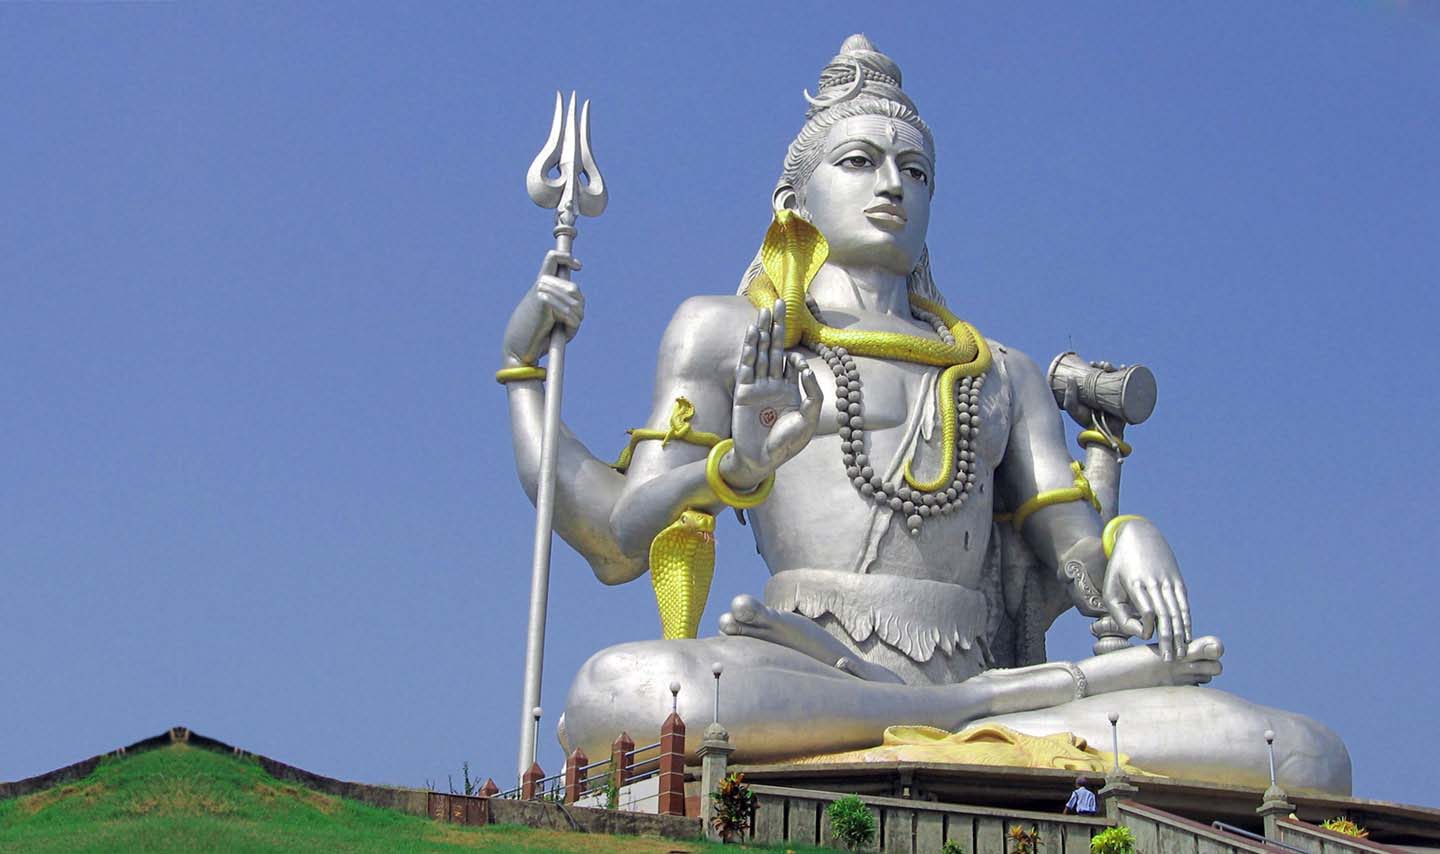 Lord Shiva Wallpaper, photo, picture & image for desktop